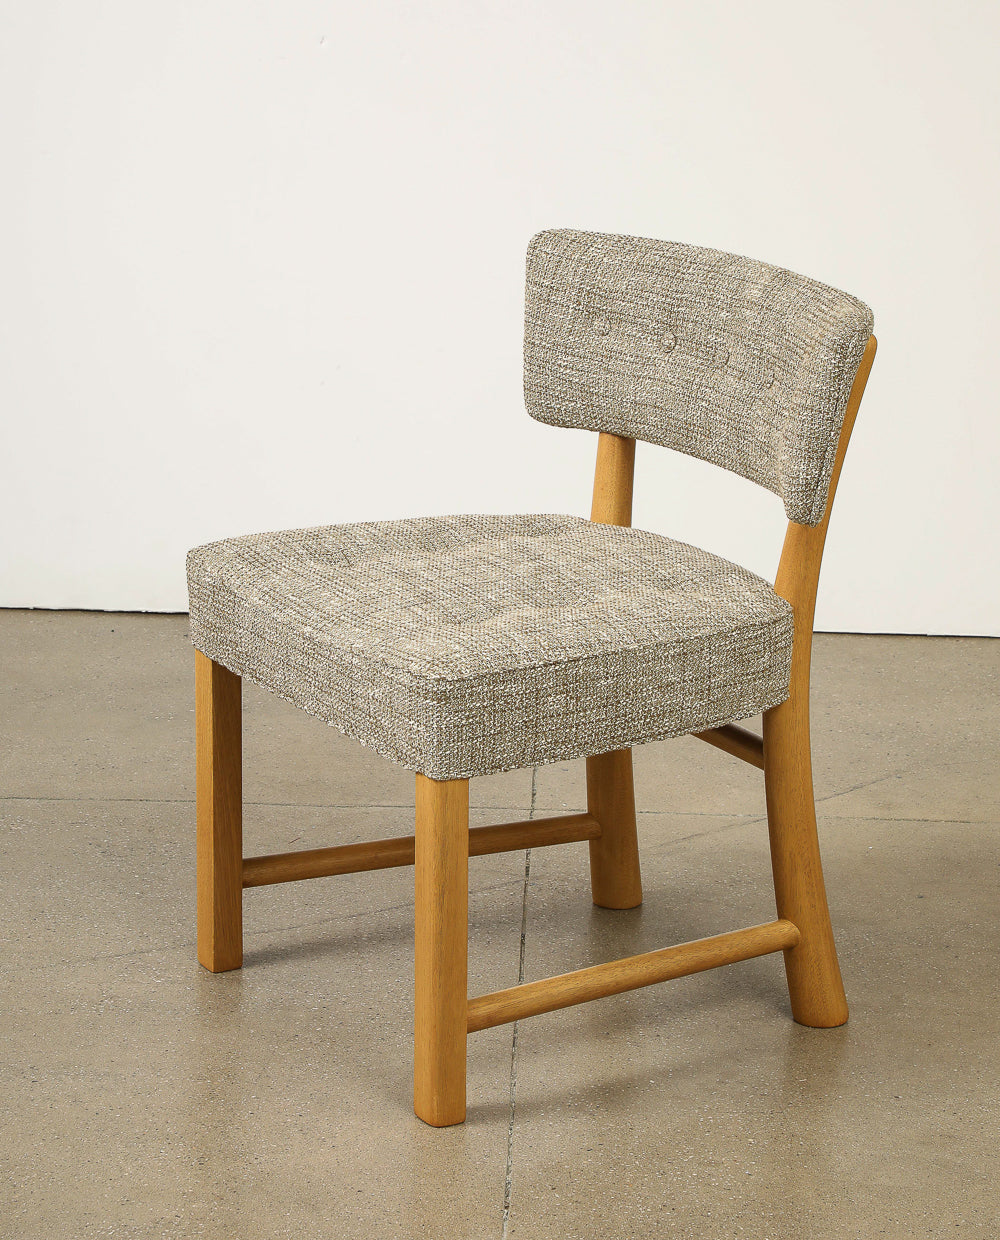 No. 4735 Dining Chairs by Edward Wormley for Dunbar